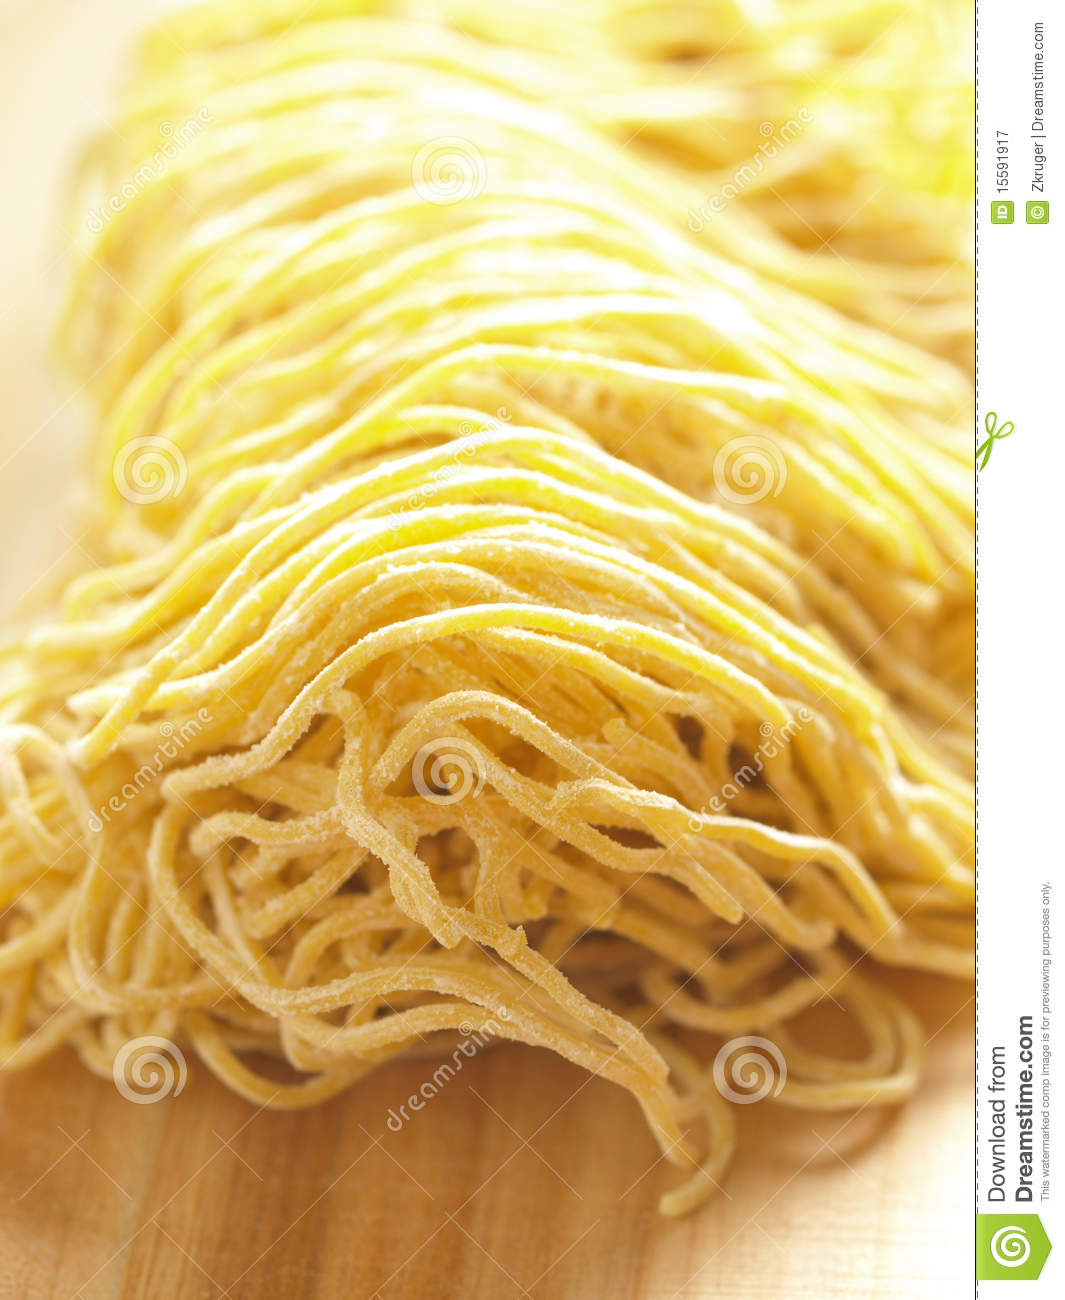 Raw Egg Noodles Royalty Free Stock Photography   Image  15591917